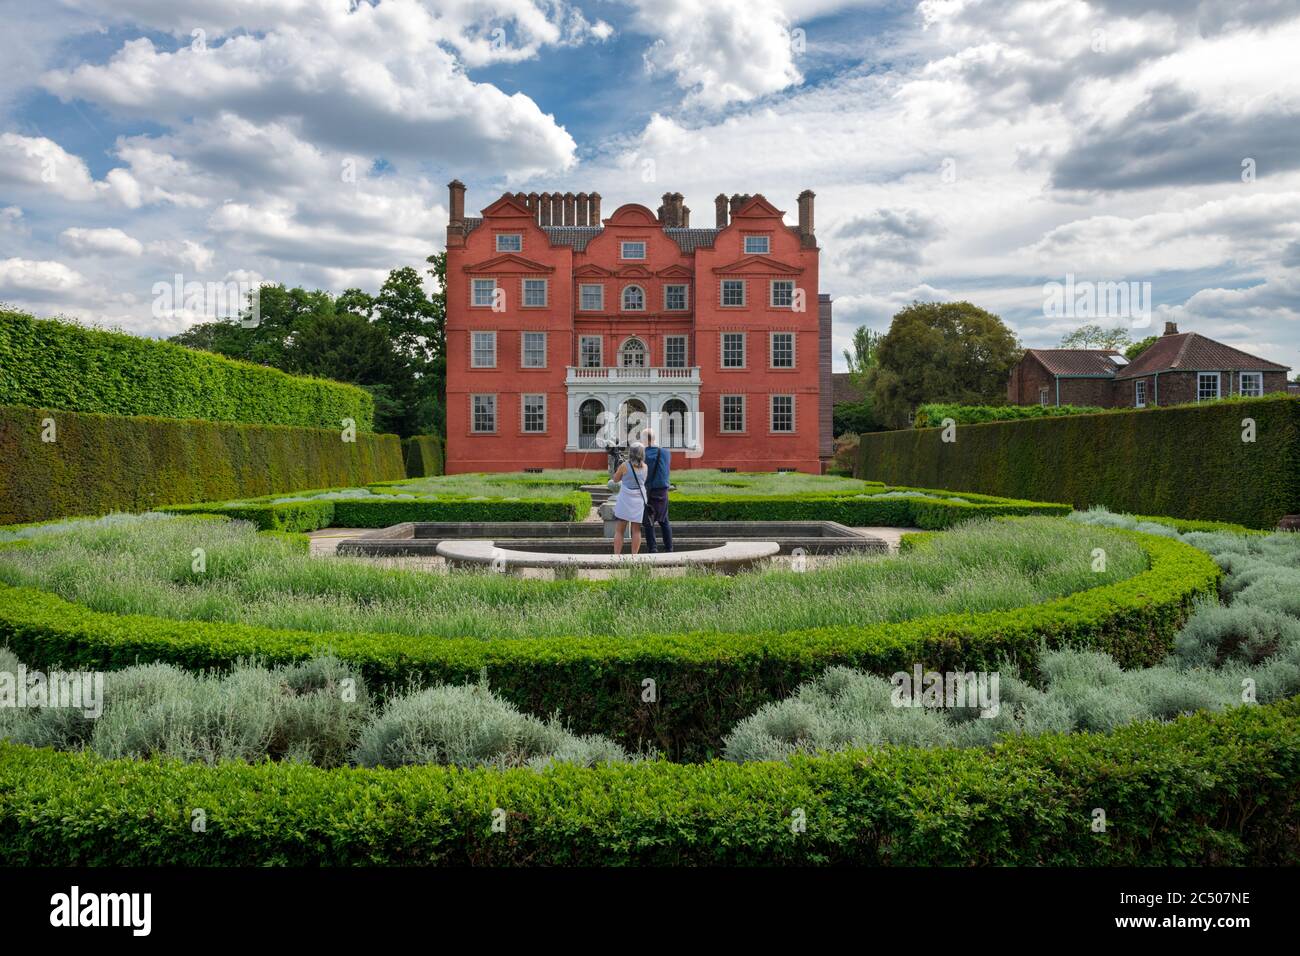 A couple in the formal garden of Kew Palace sightseeing. It is a British Royal palace in Kew Gardens. Stock Photo